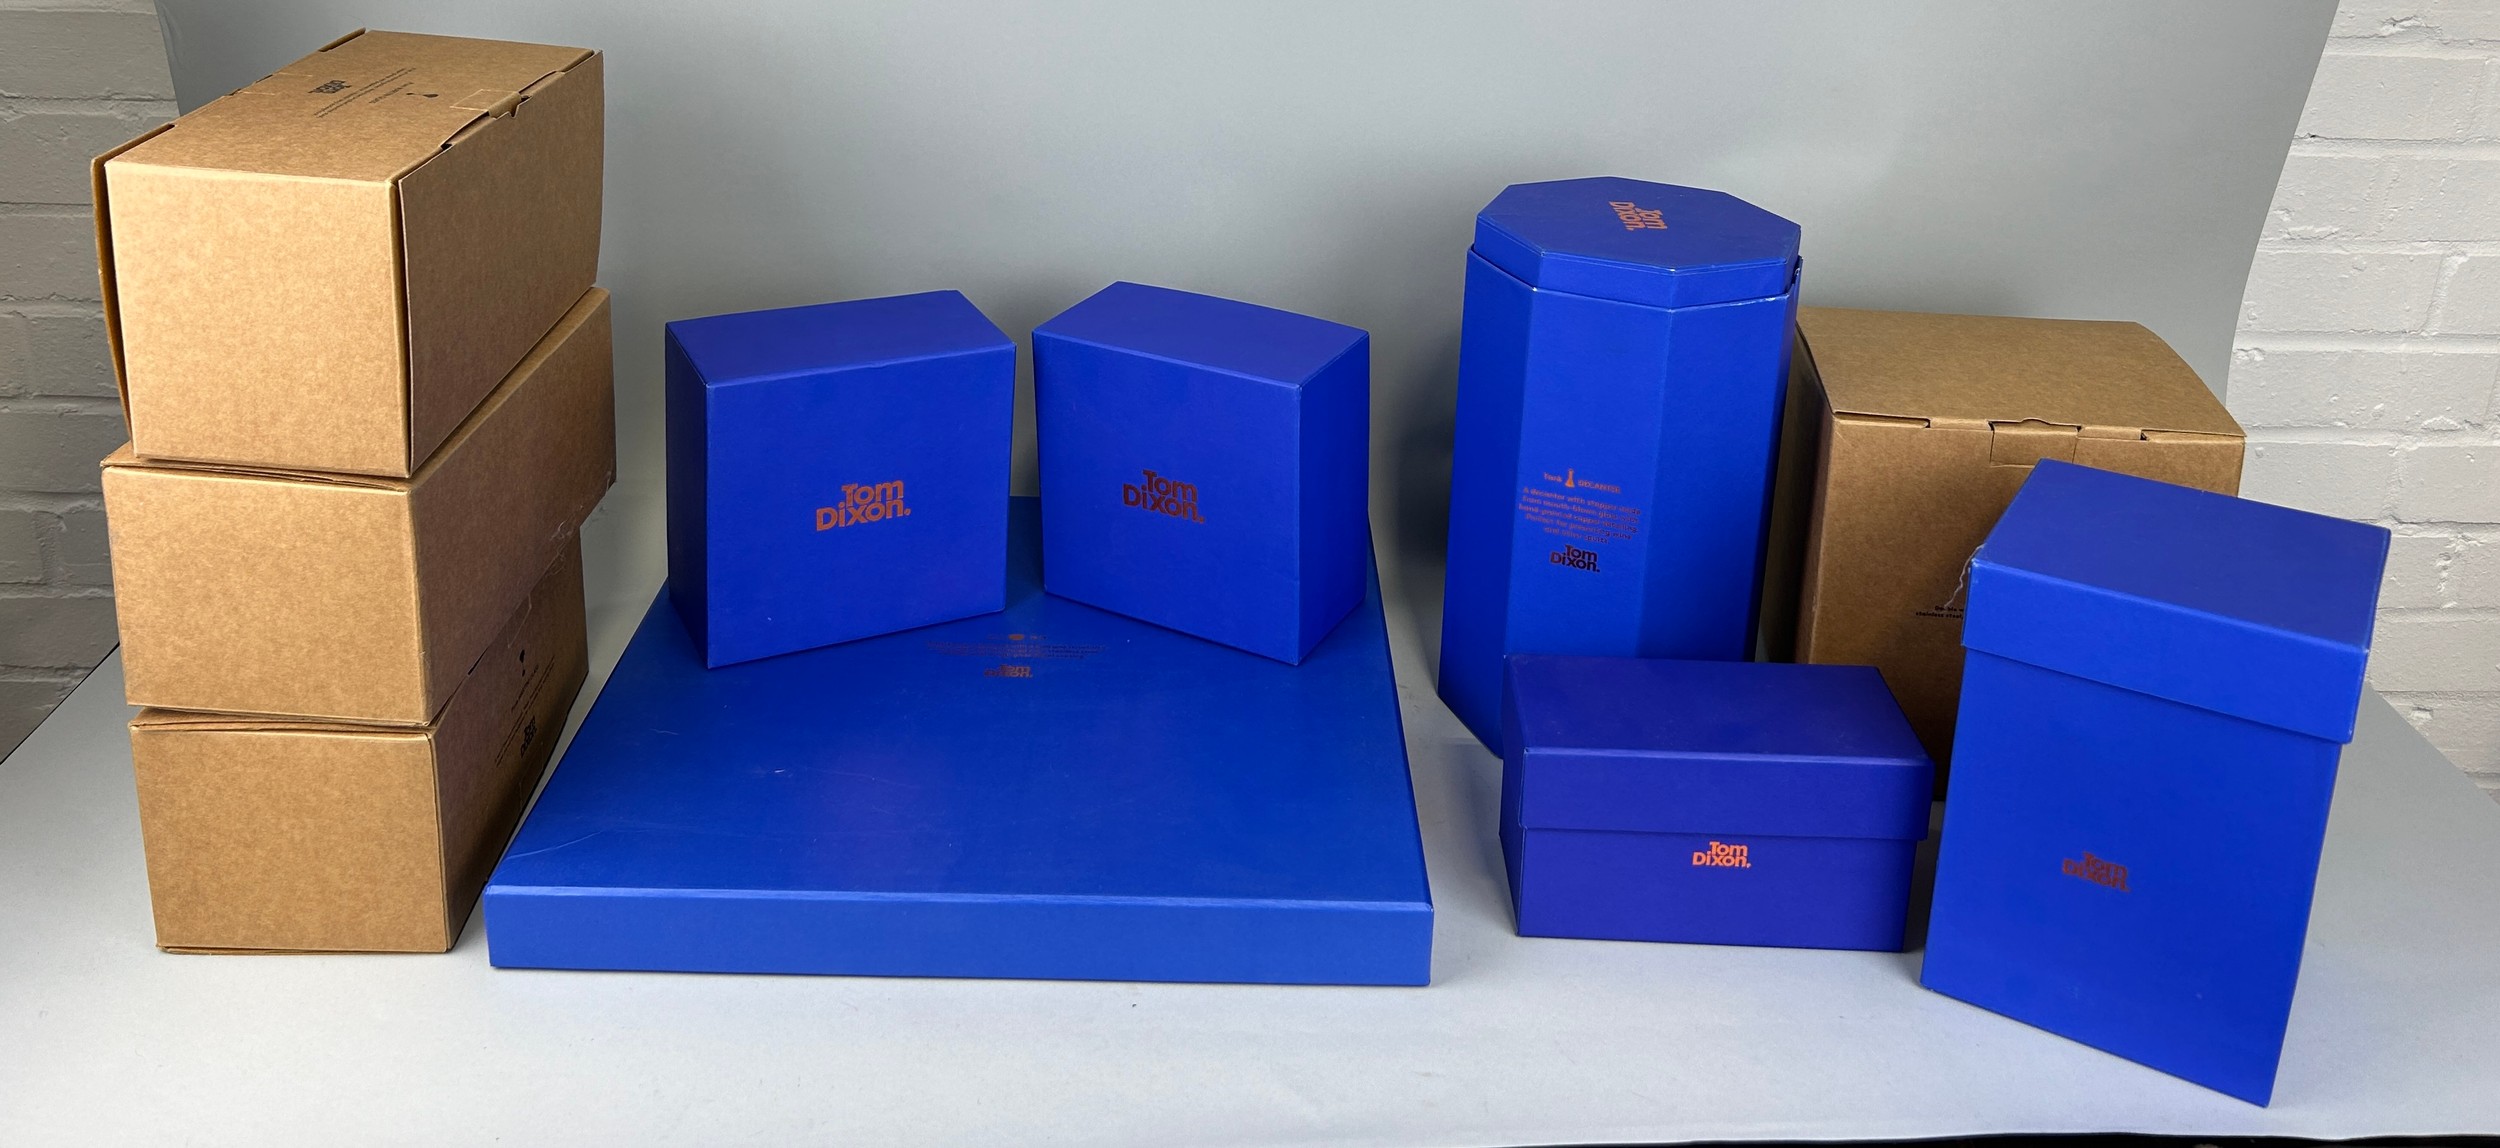 A COLLECTION OF TOM DIXON GLASSWARE AND METALWARE IN ORIGINAL PACKAGING (10 BOXES), To include six